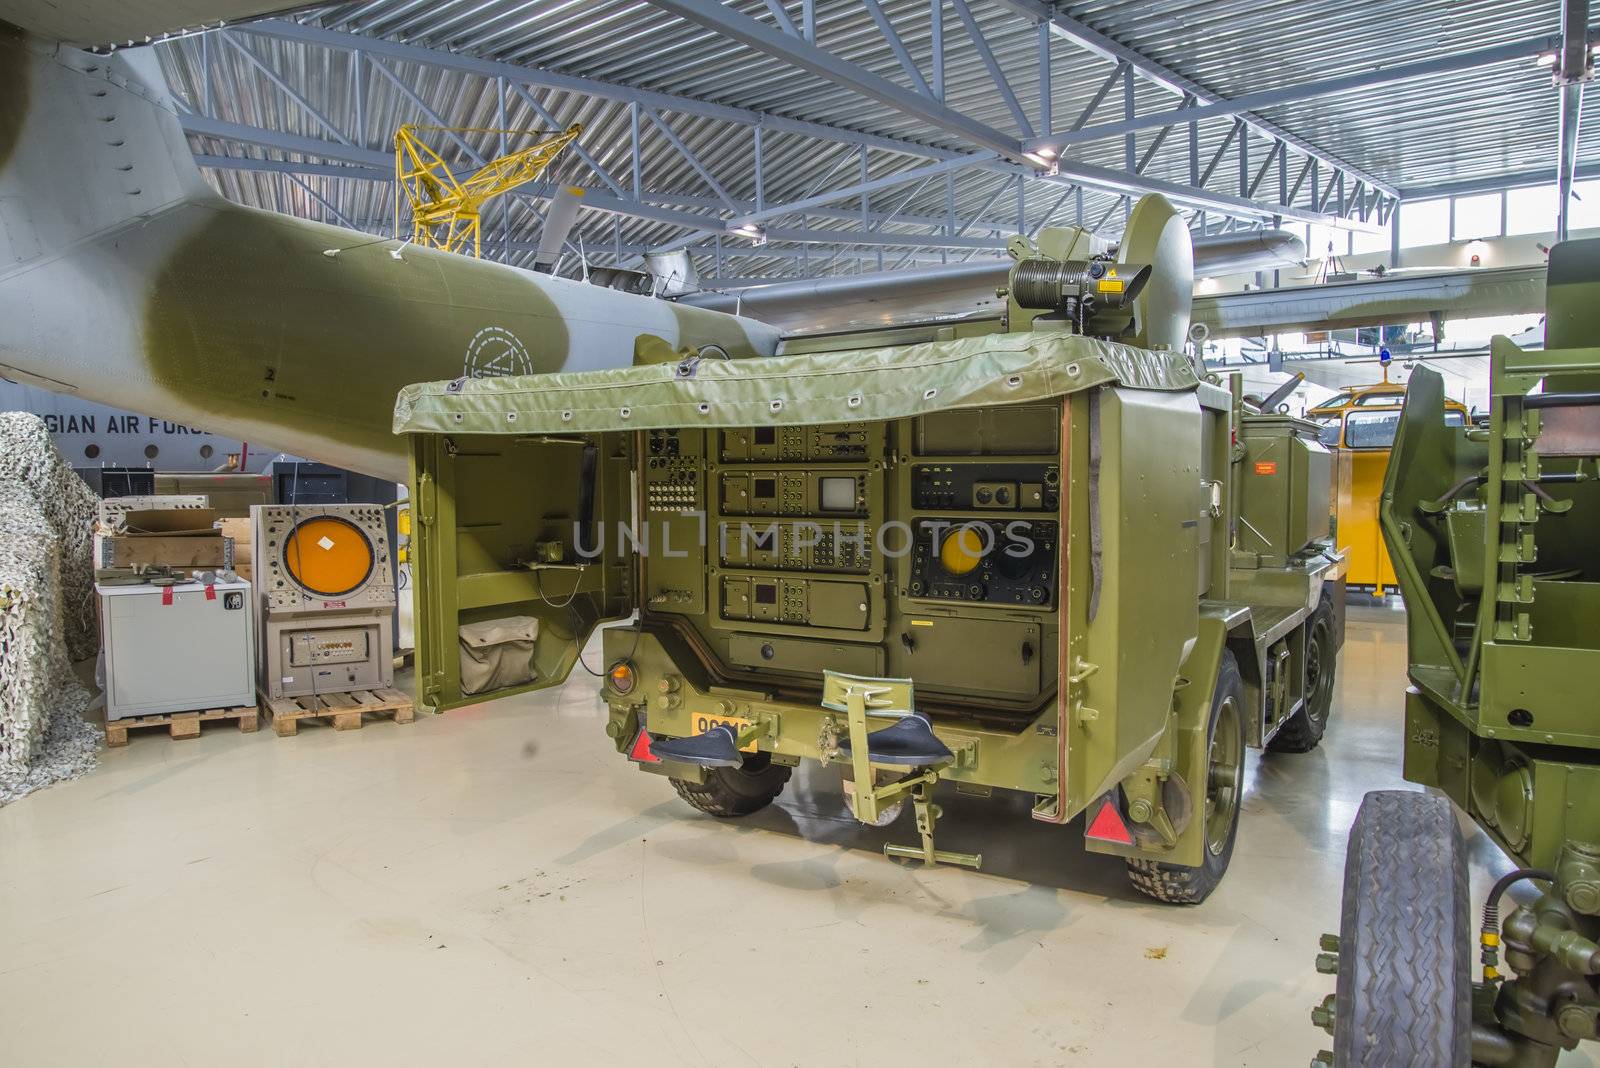 mobile radar and tracking systems for nike missiles was used to search and locate the enemy targets, the pictures are shot in march 2013 by norwegian armed forces aircraft collection which is a military aviation museum located at gardermoen, north of oslo, norway.